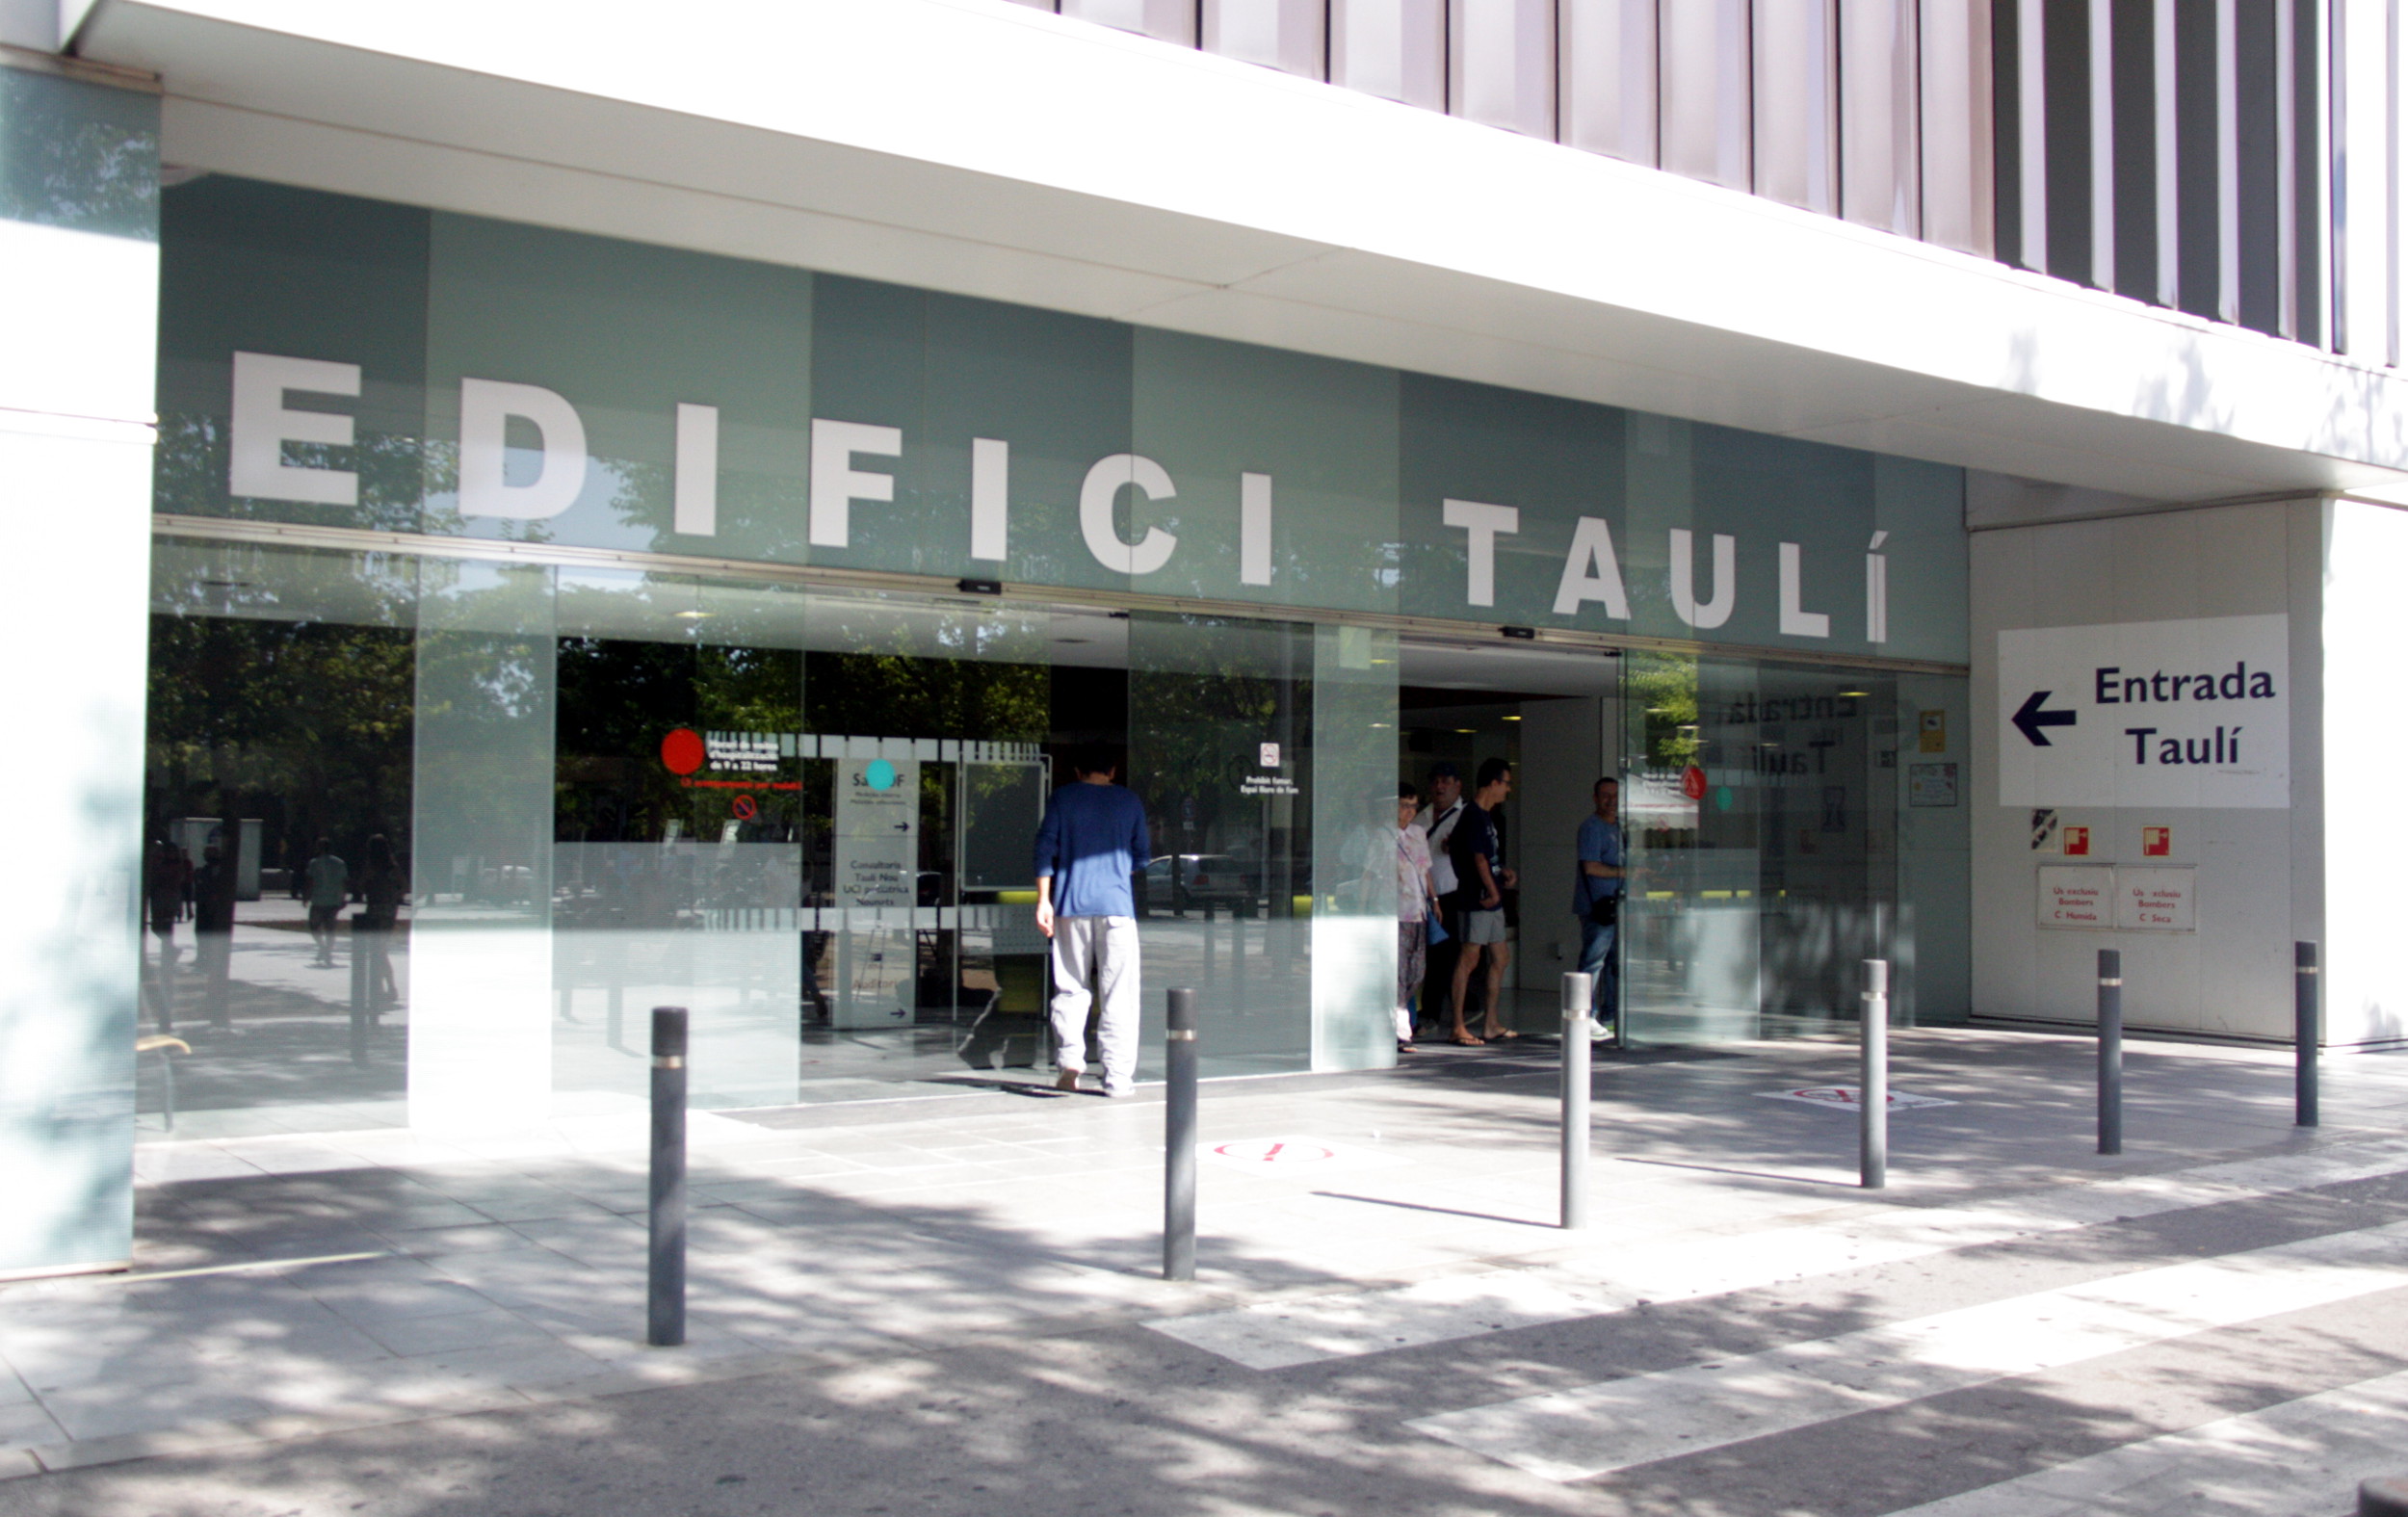 Parc Taulí Hospital in Sabadell, 30 kilometres Northfrom Barcleona (by ACN)